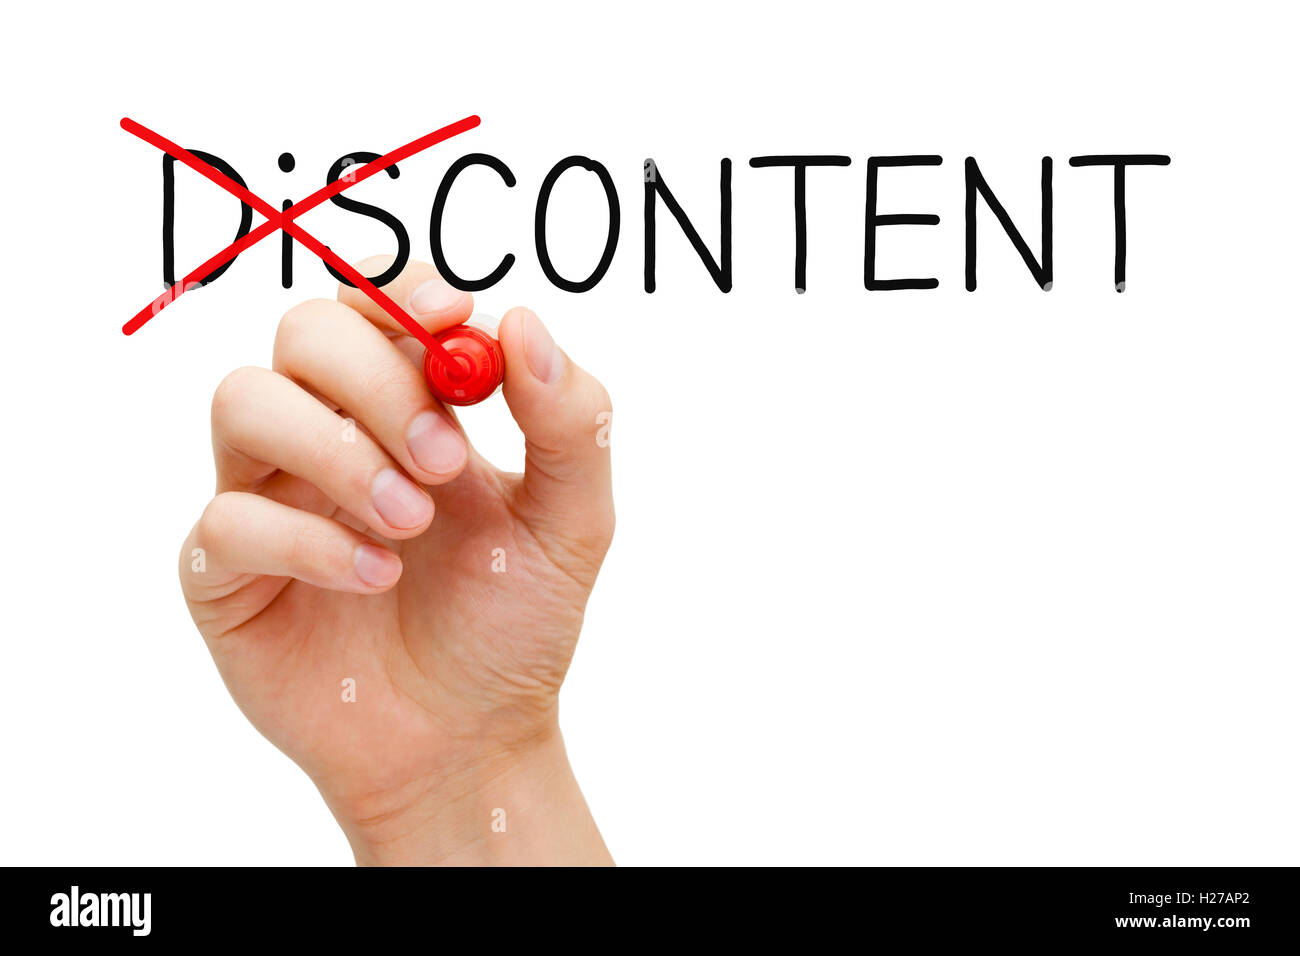 Hand turning the word Discontent into Content with red marker isolated on white. Stock Photo